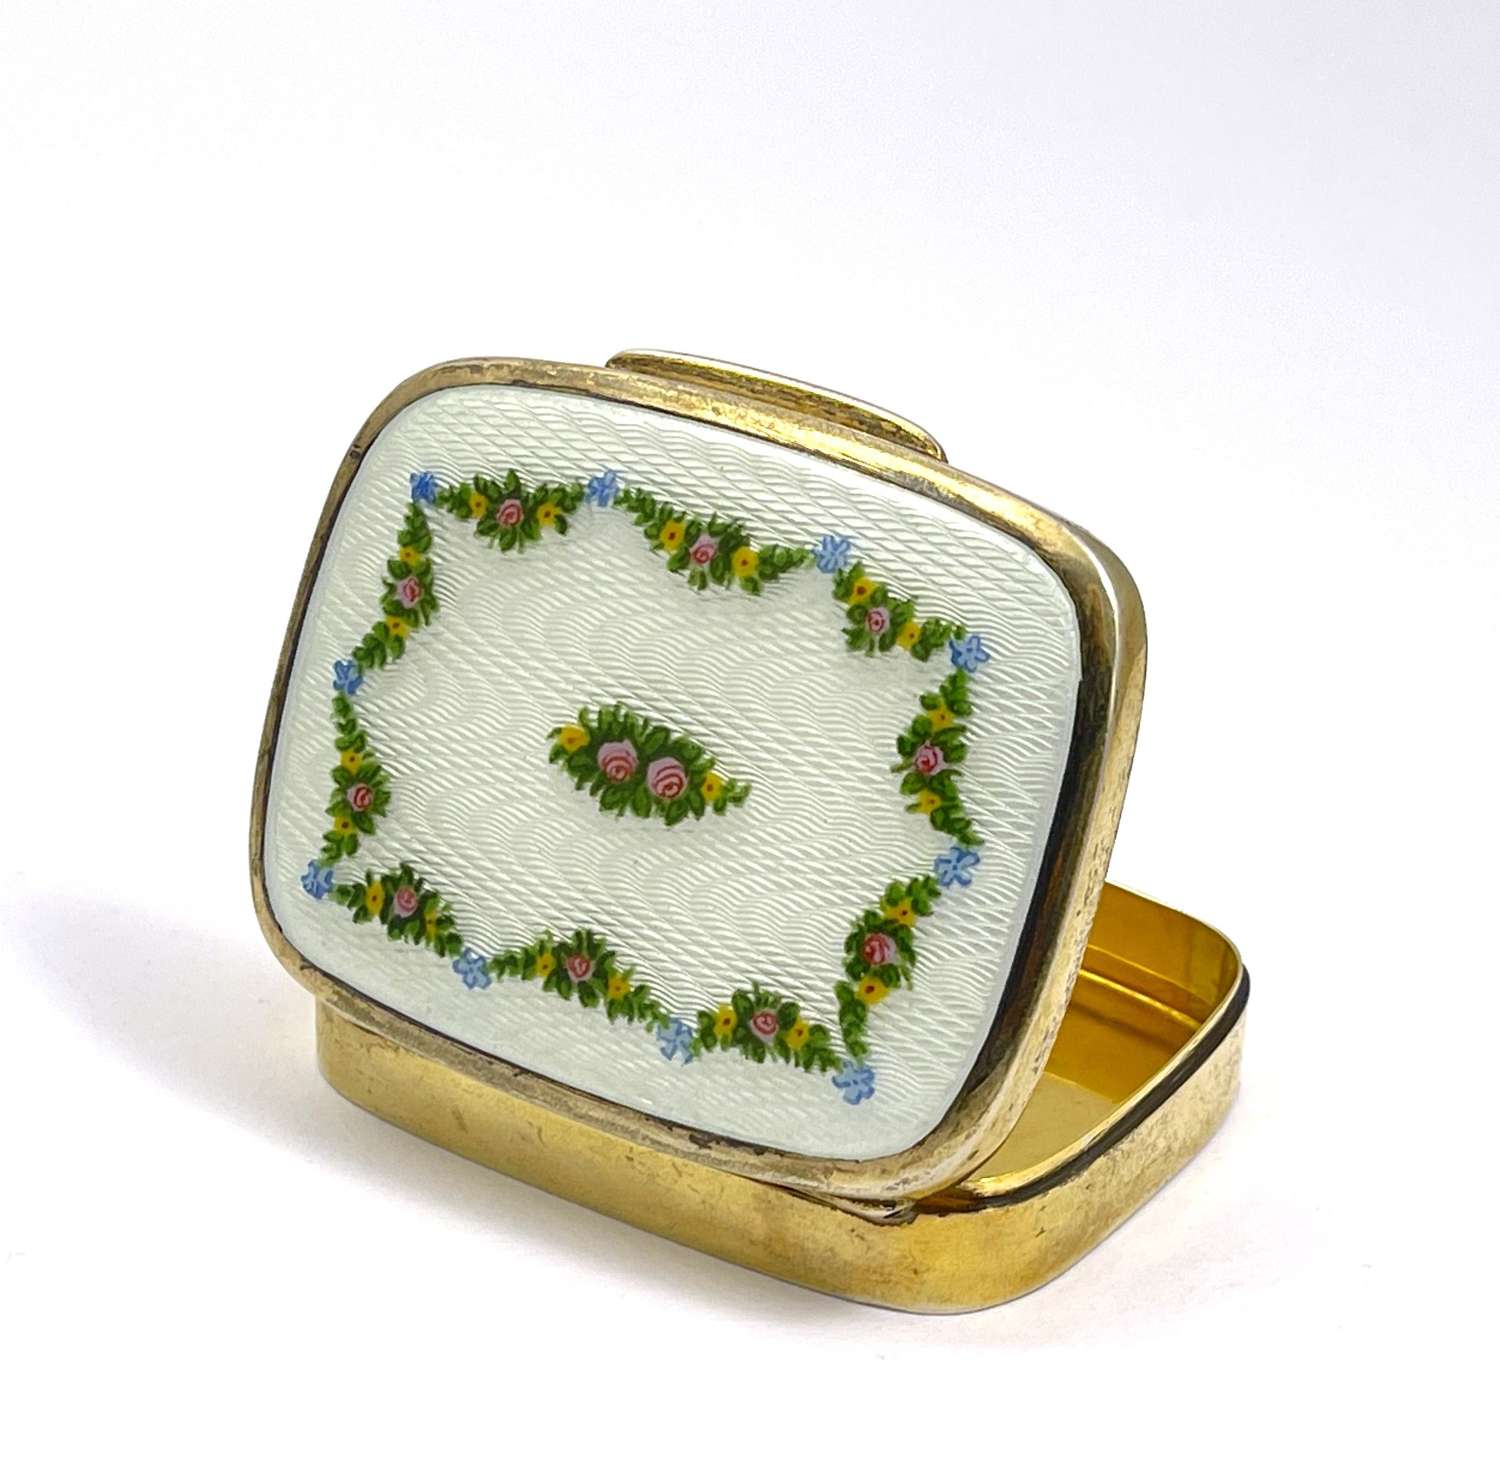 Antique French Guilloche Enamel and Silver Box with Roses